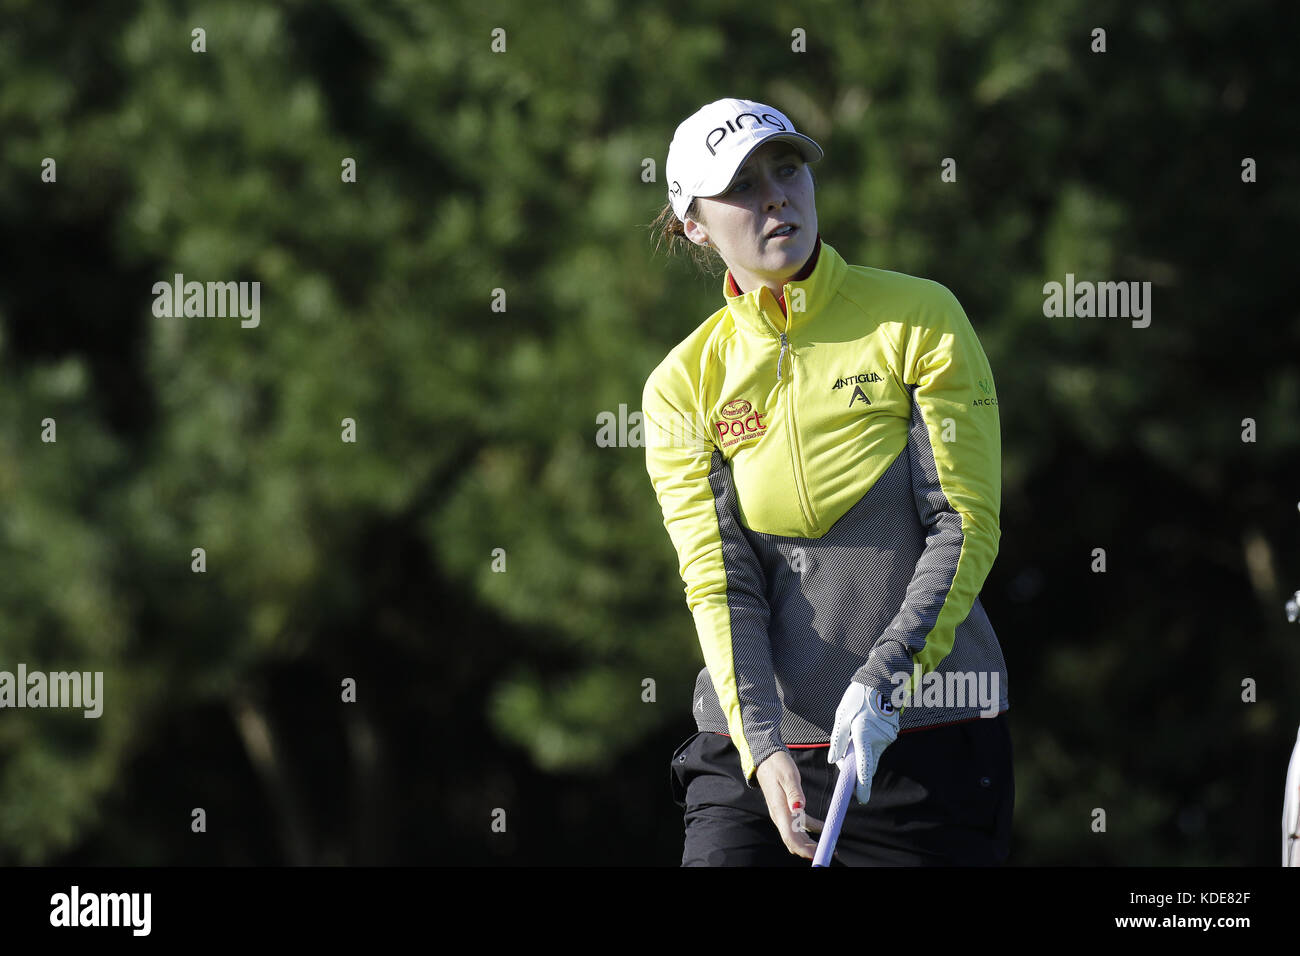 Incheon, South Korea. 13th Oct, 2017. Brittany Altomare of USA action on the 2th tee during an KEB HANA BANK LPGA Championship day 2 at Sky72 Ocean Golf range in Incheon, South Korea. Credit: Ryu Seung Il/ZUMA Wire/Alamy Live News Stock Photo